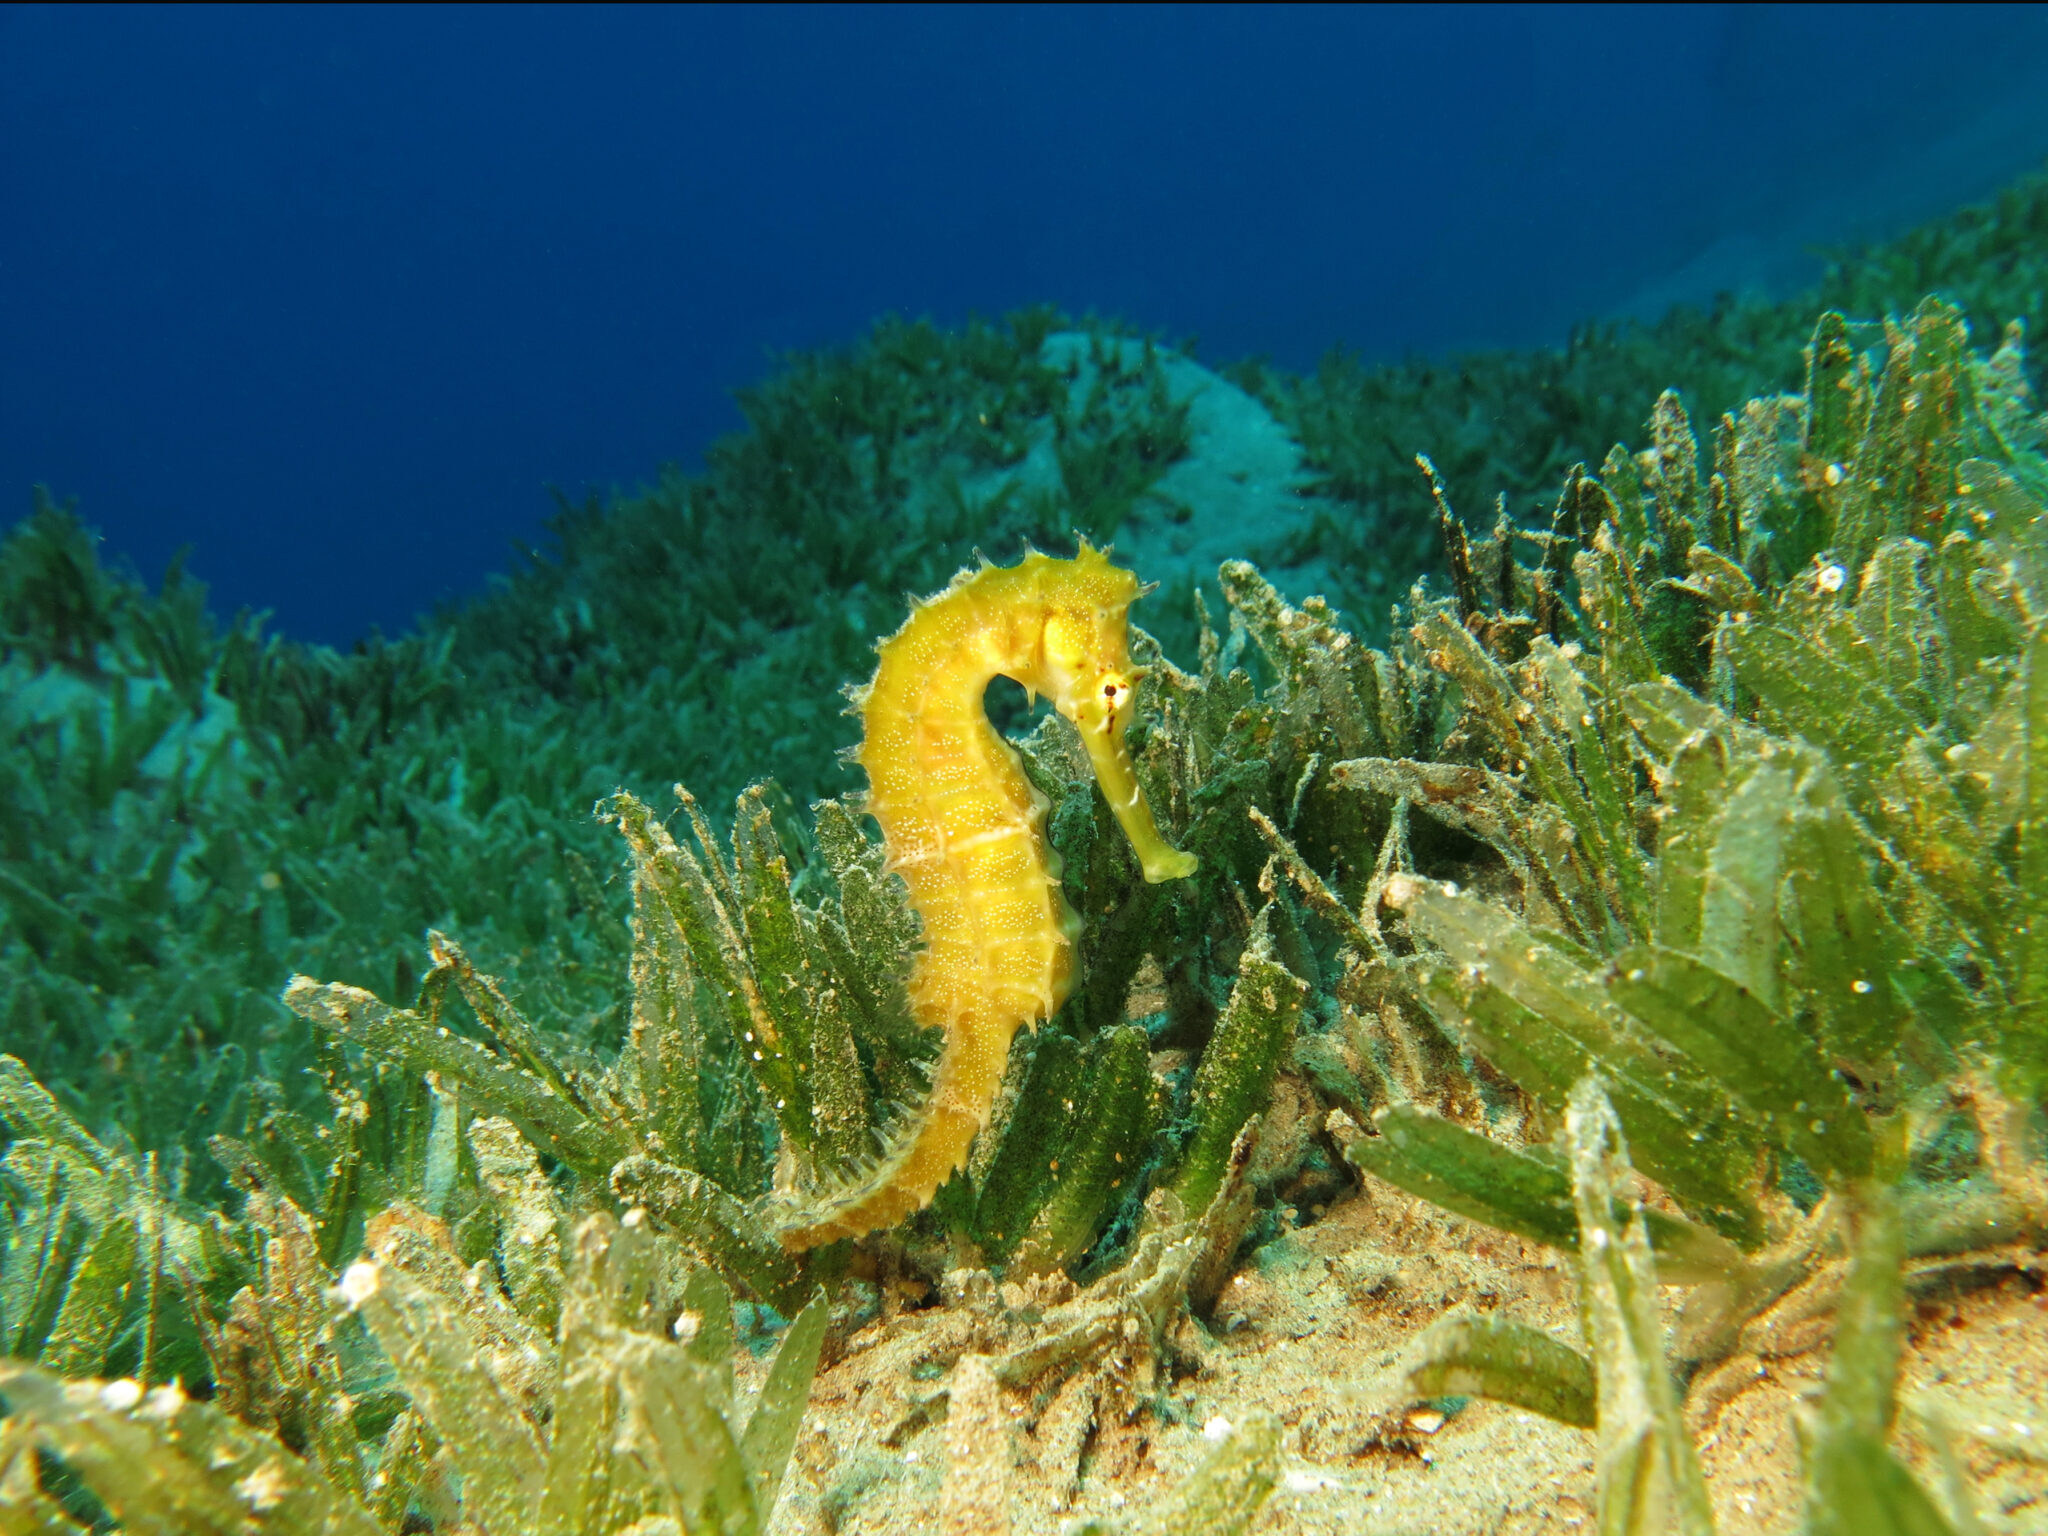 A bright yellow seahorse finds shelter among a seagrass meadow and is one of many reasons why seagrass conservation is vital